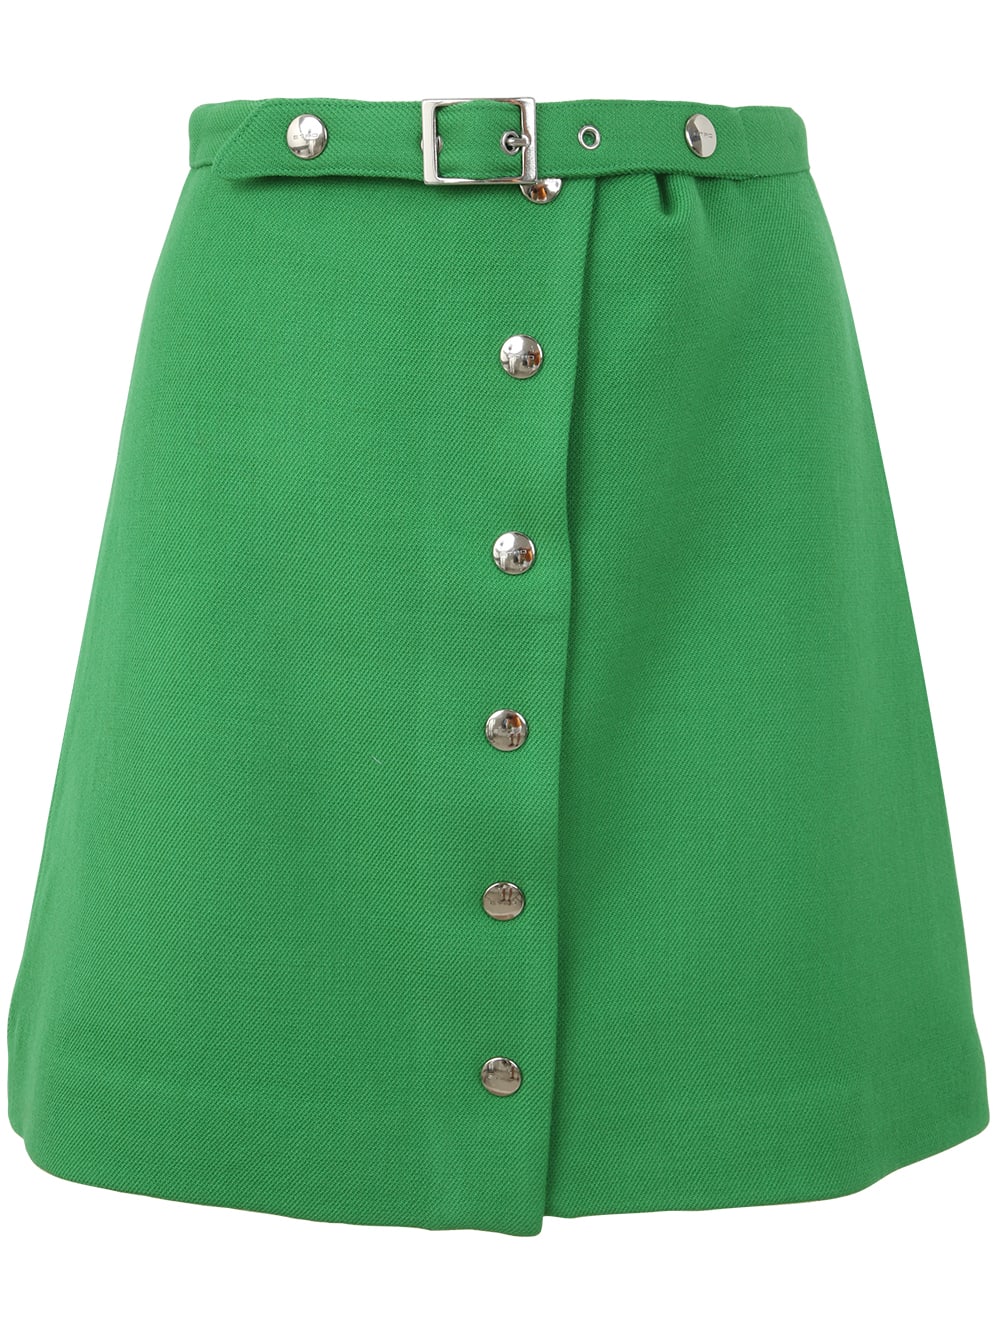 Mini Skirt With Buttons In Front